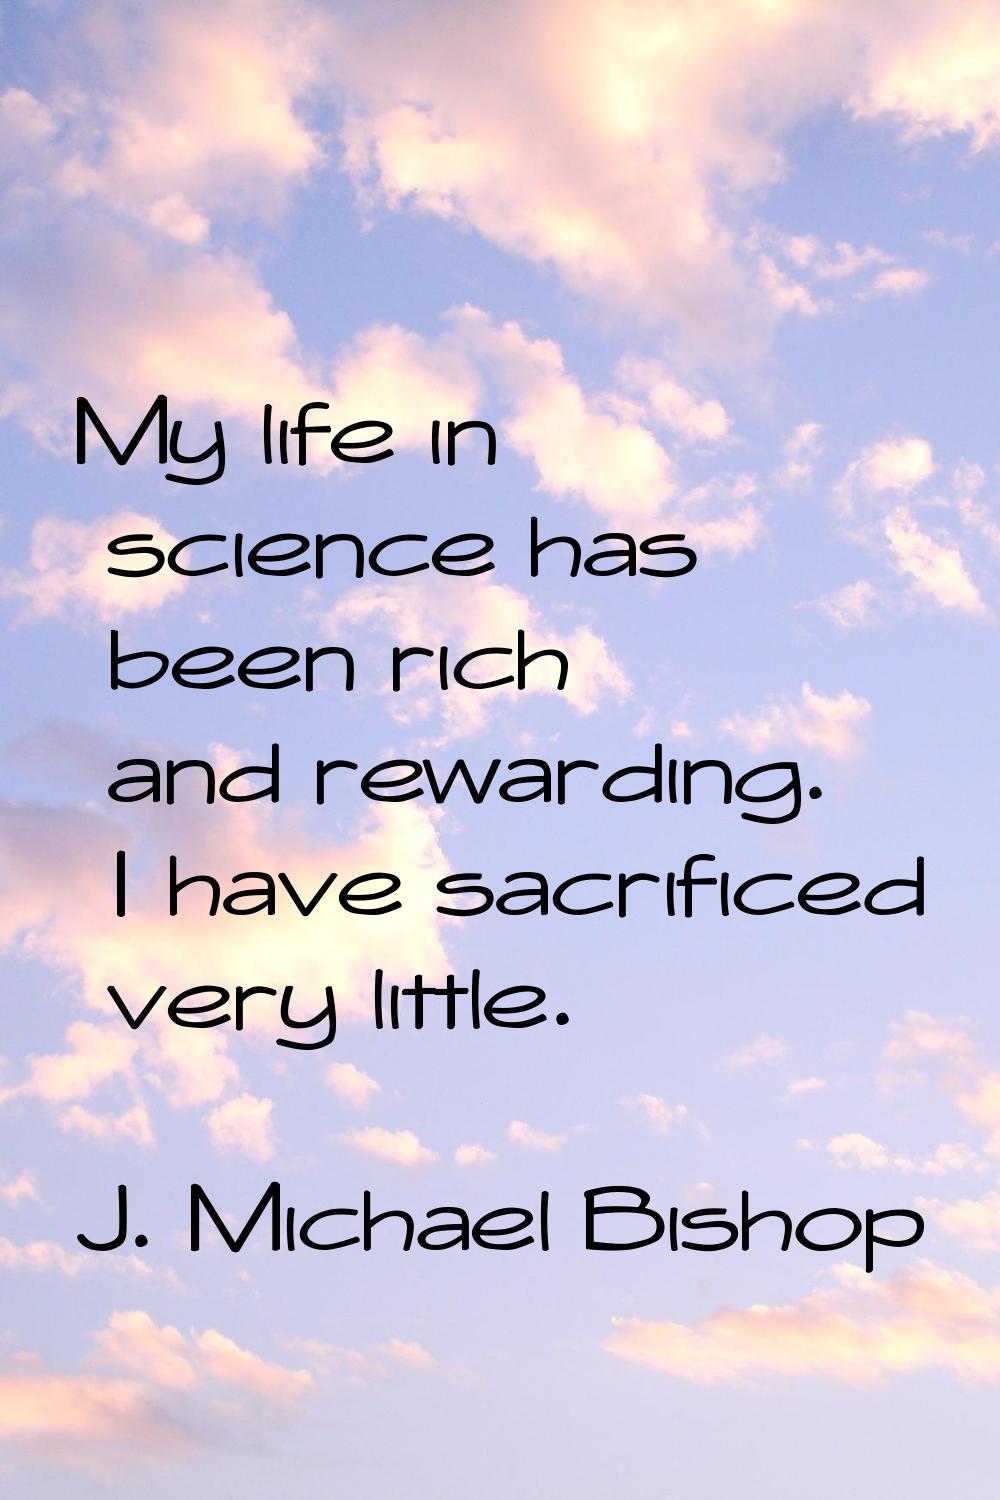 My life in science has been rich and rewarding. I have sacrificed very little.